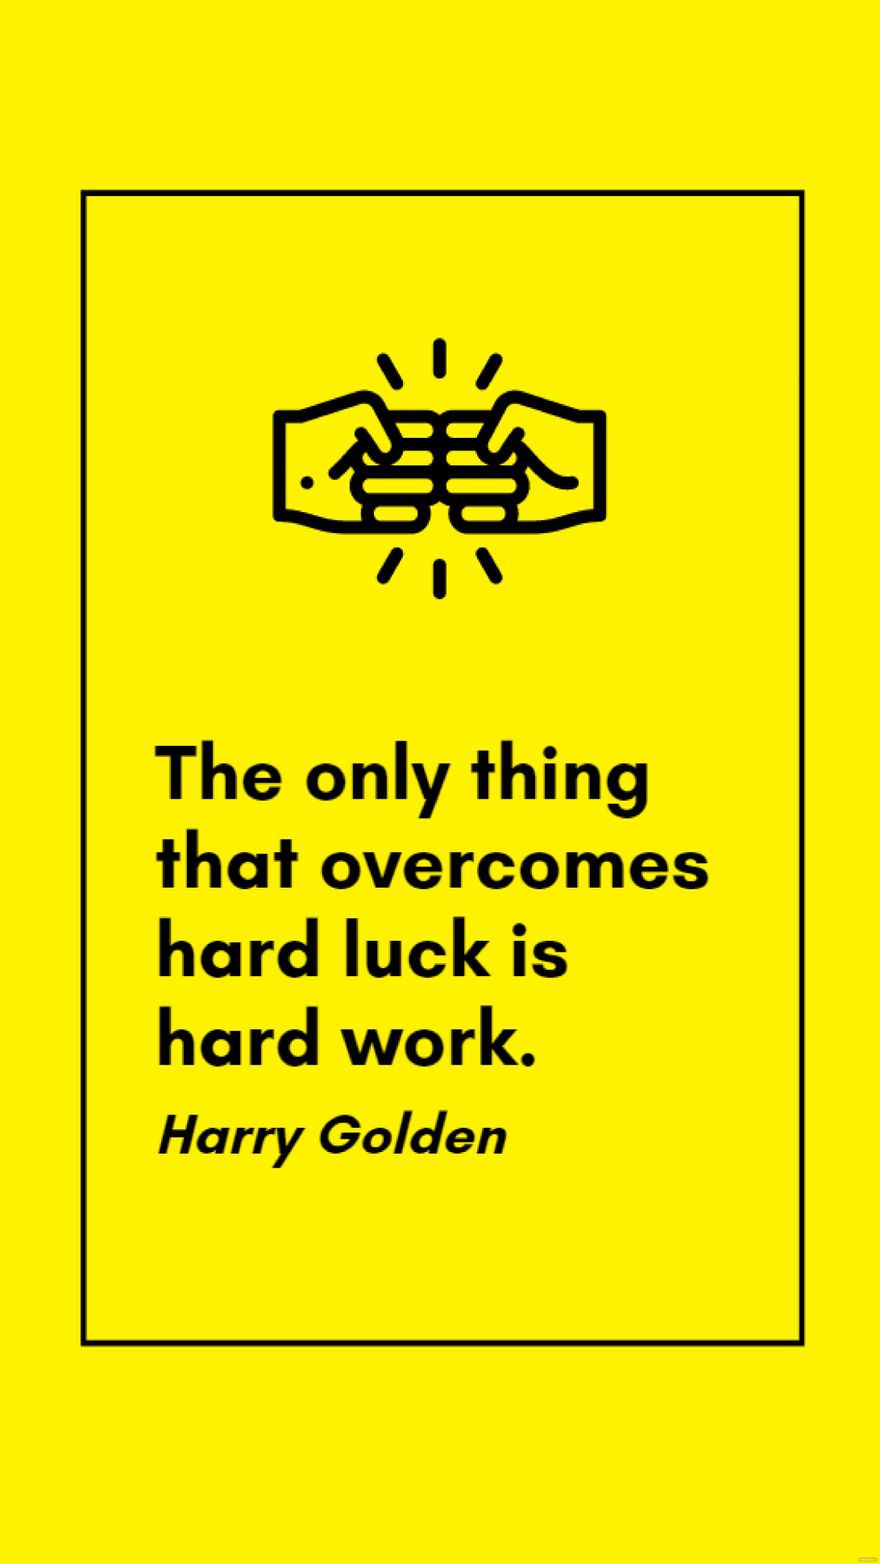 Harry Golden - The only thing that overcomes hard luck is hard work.